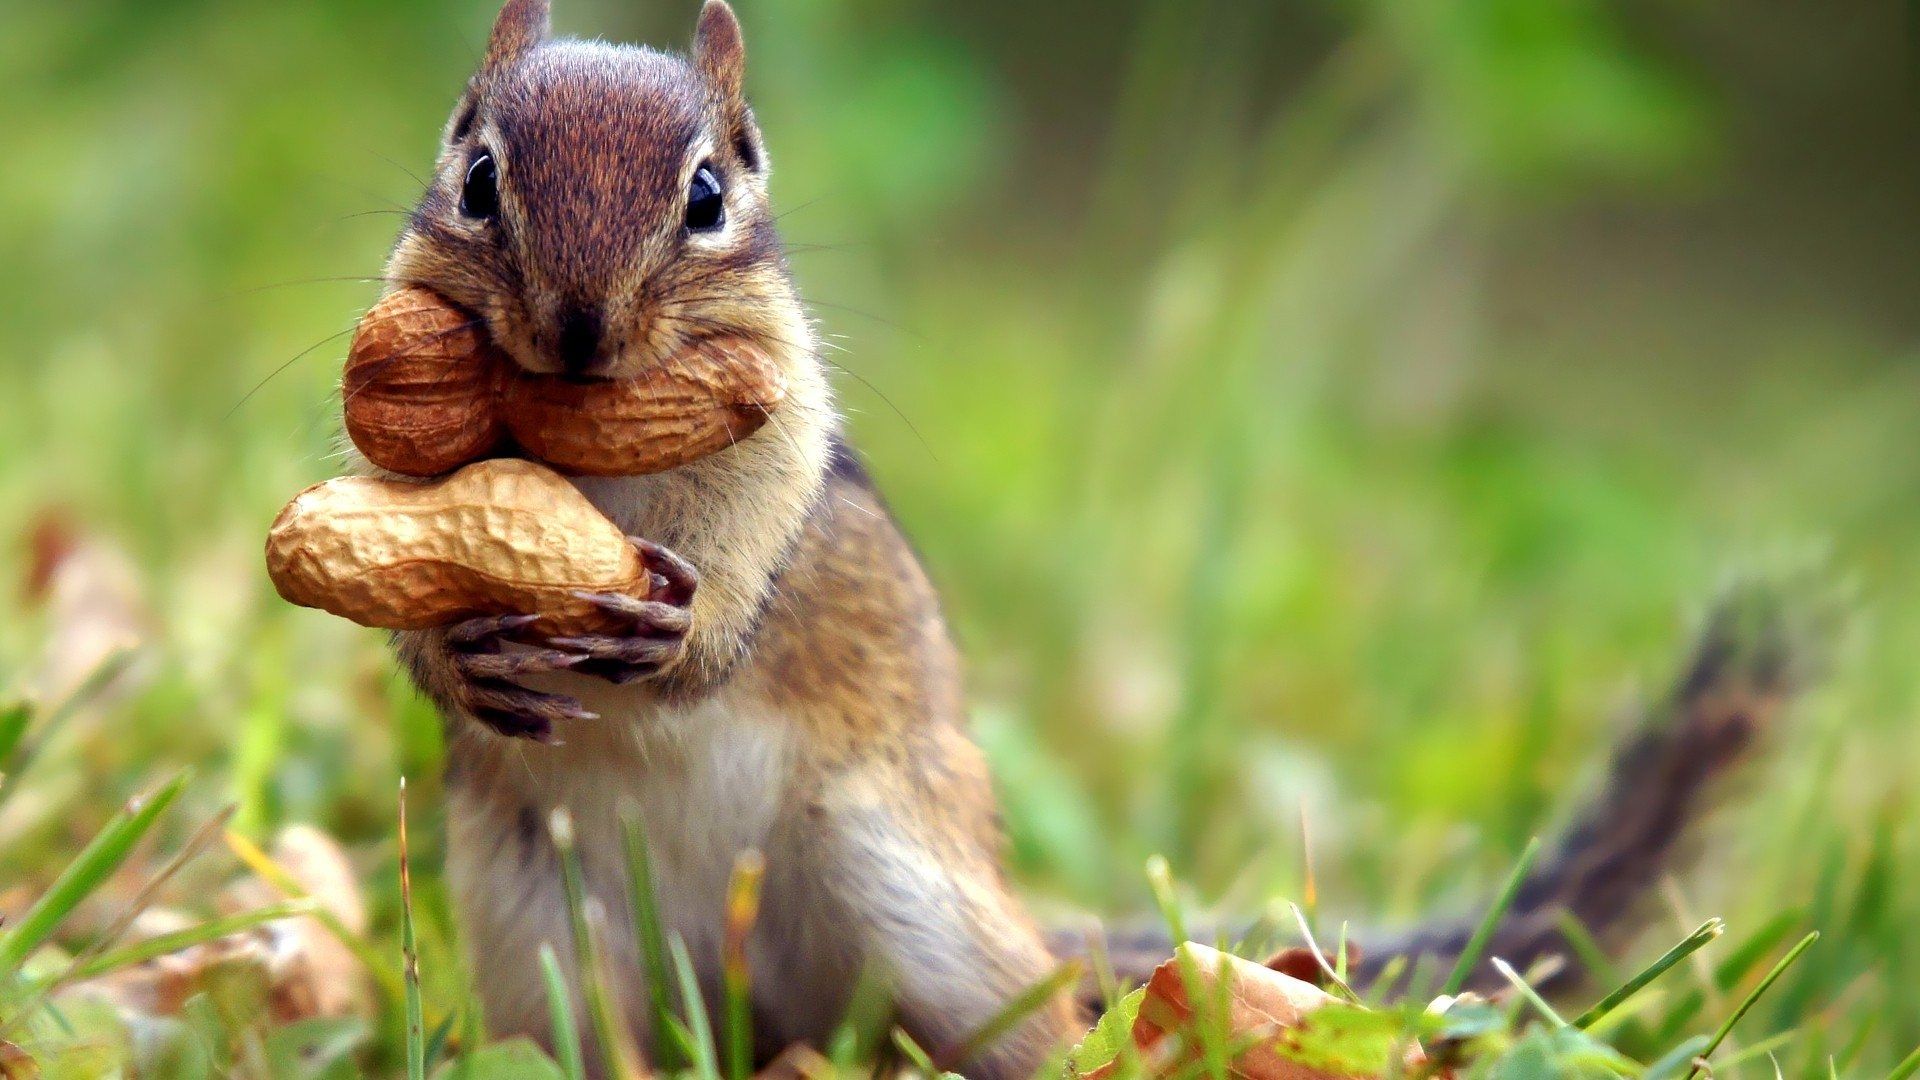 Cool Squirrel Wallpapers